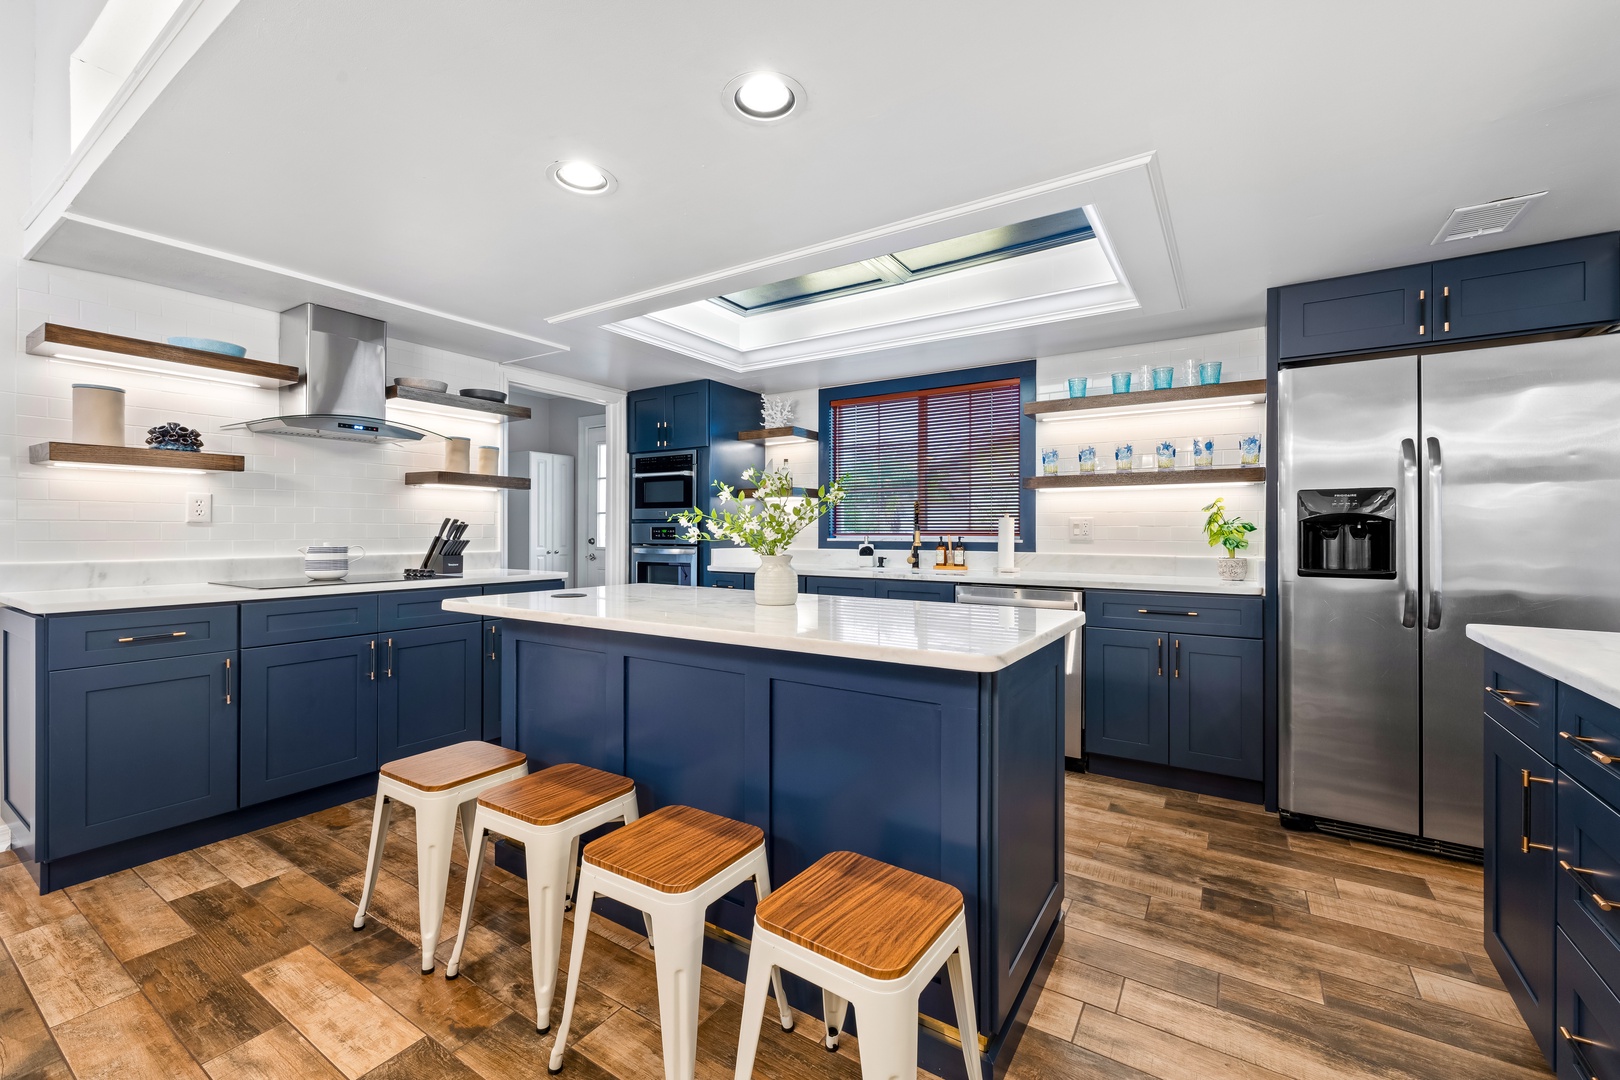 Chef's dream: Elegant coastal kitchen with ample space and amenities galore